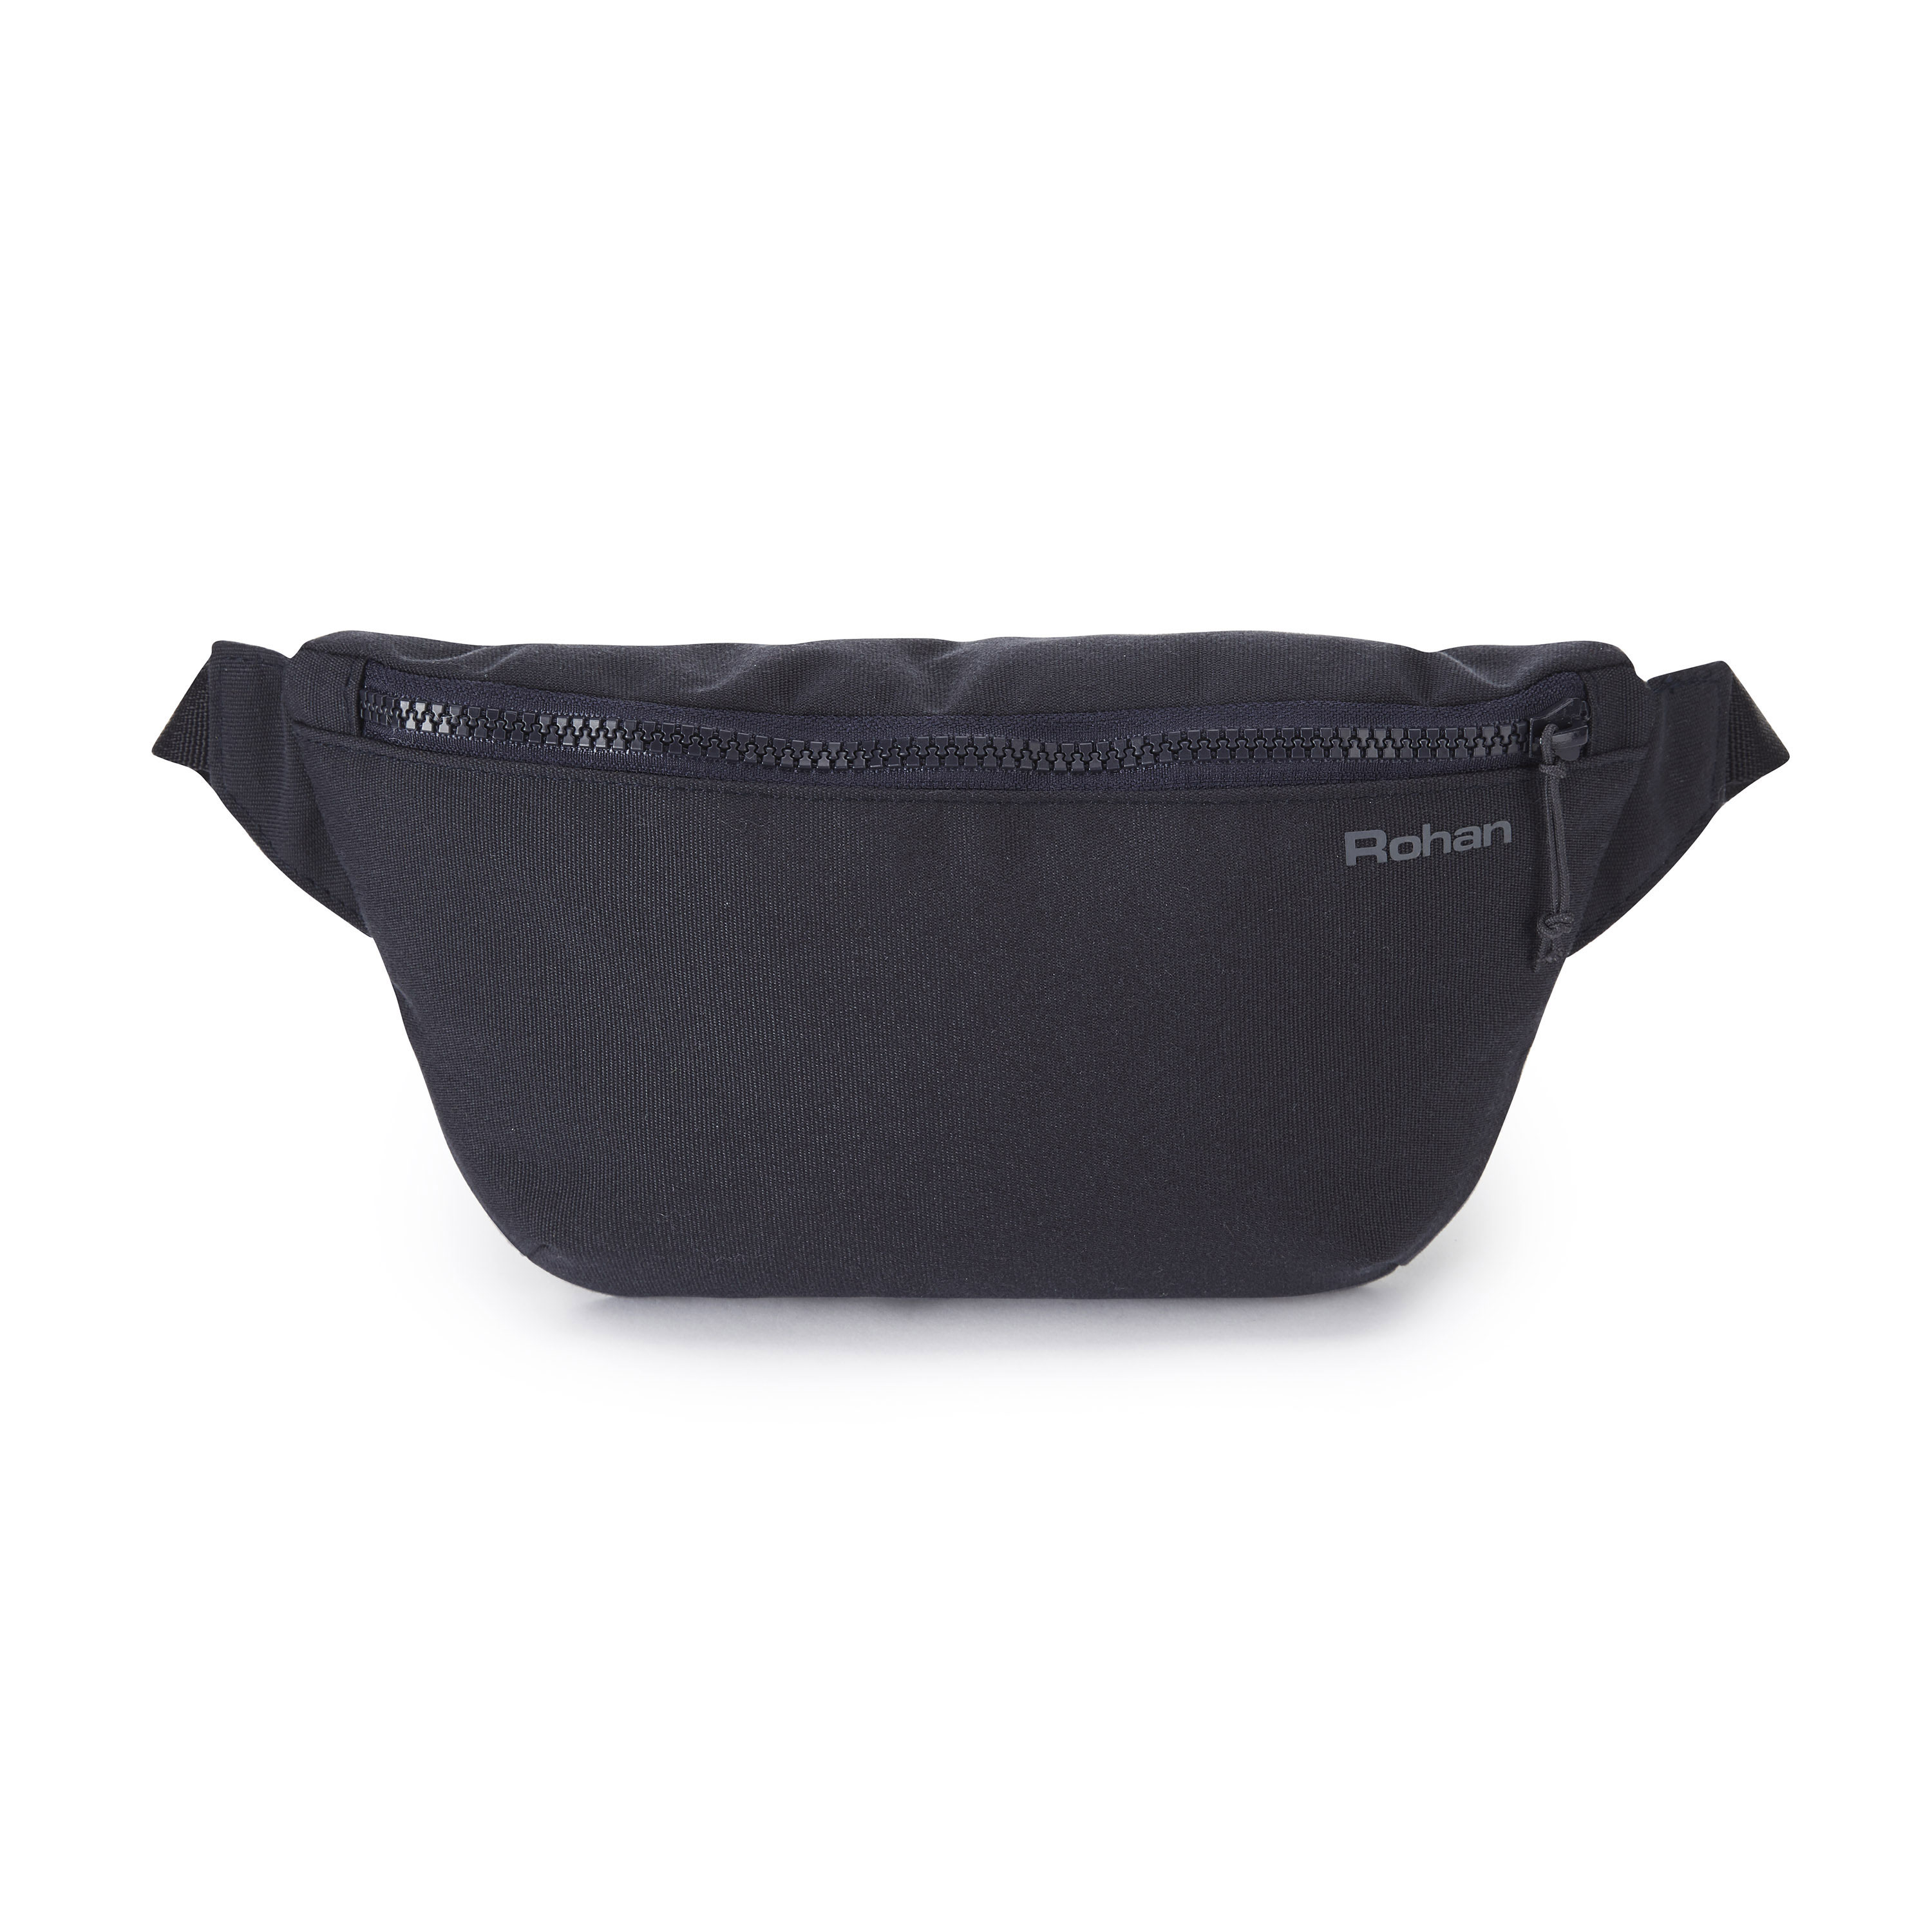 Rohan Rfid Protected Canvas Waist Pack Small